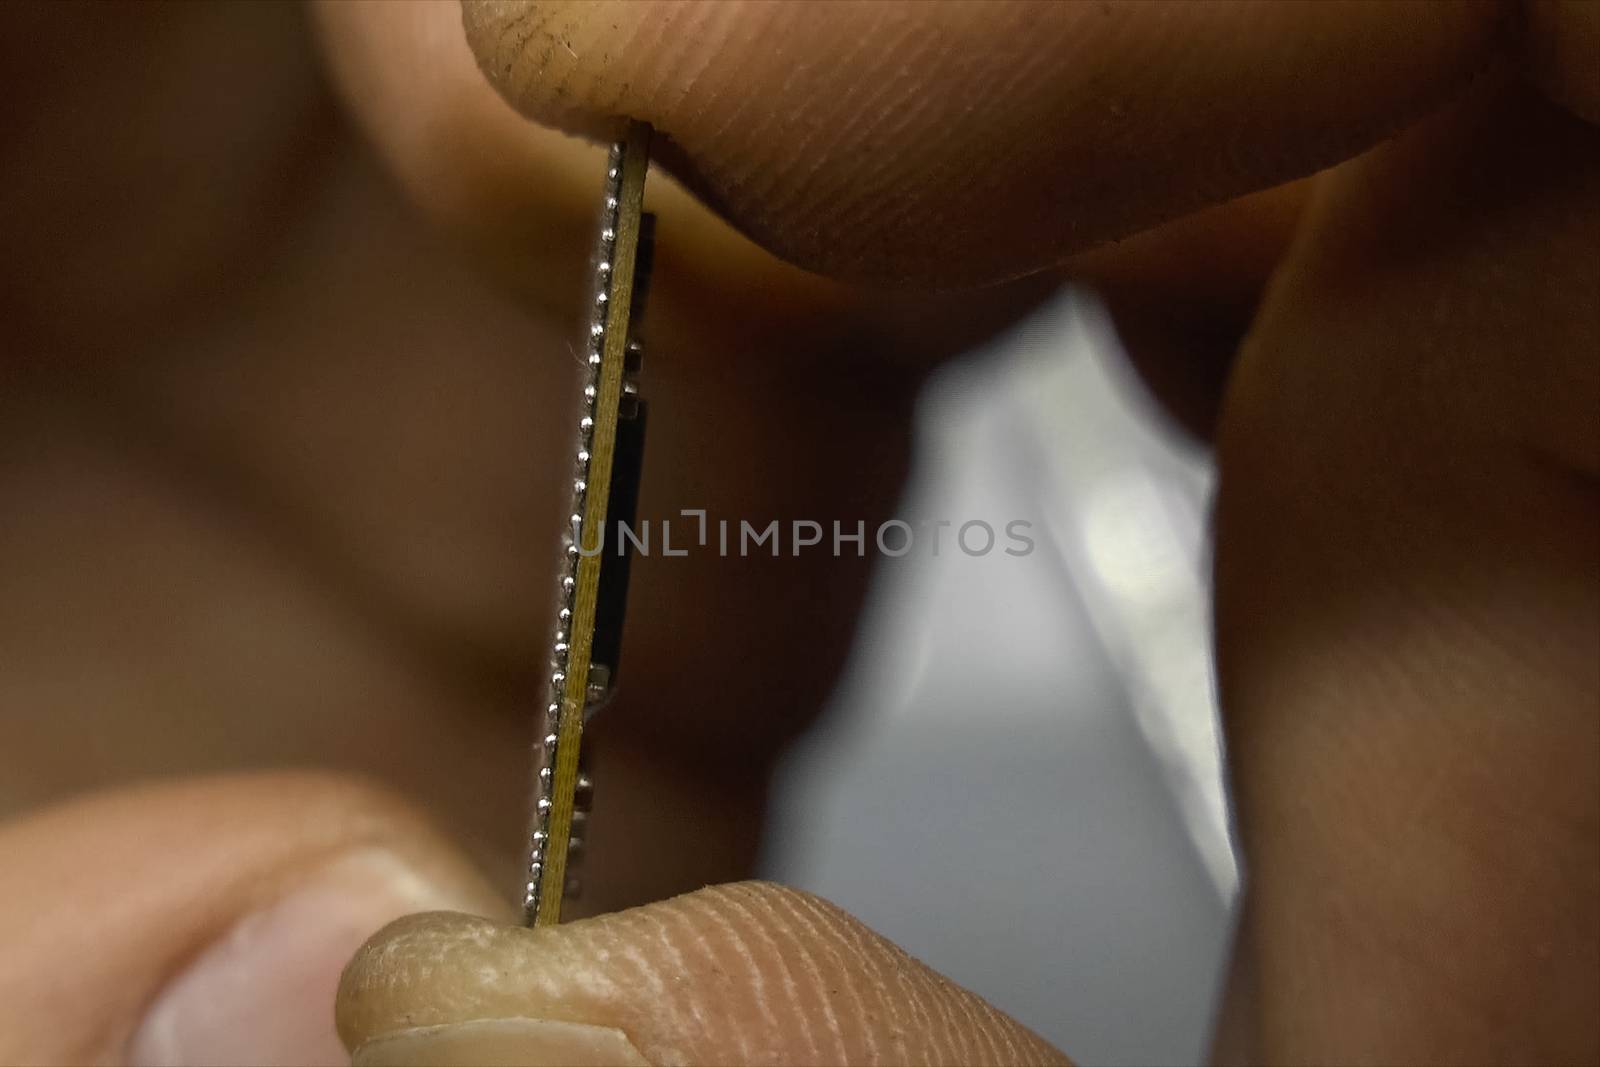 The recovered computer microprocessor chip is in the hands of a man.